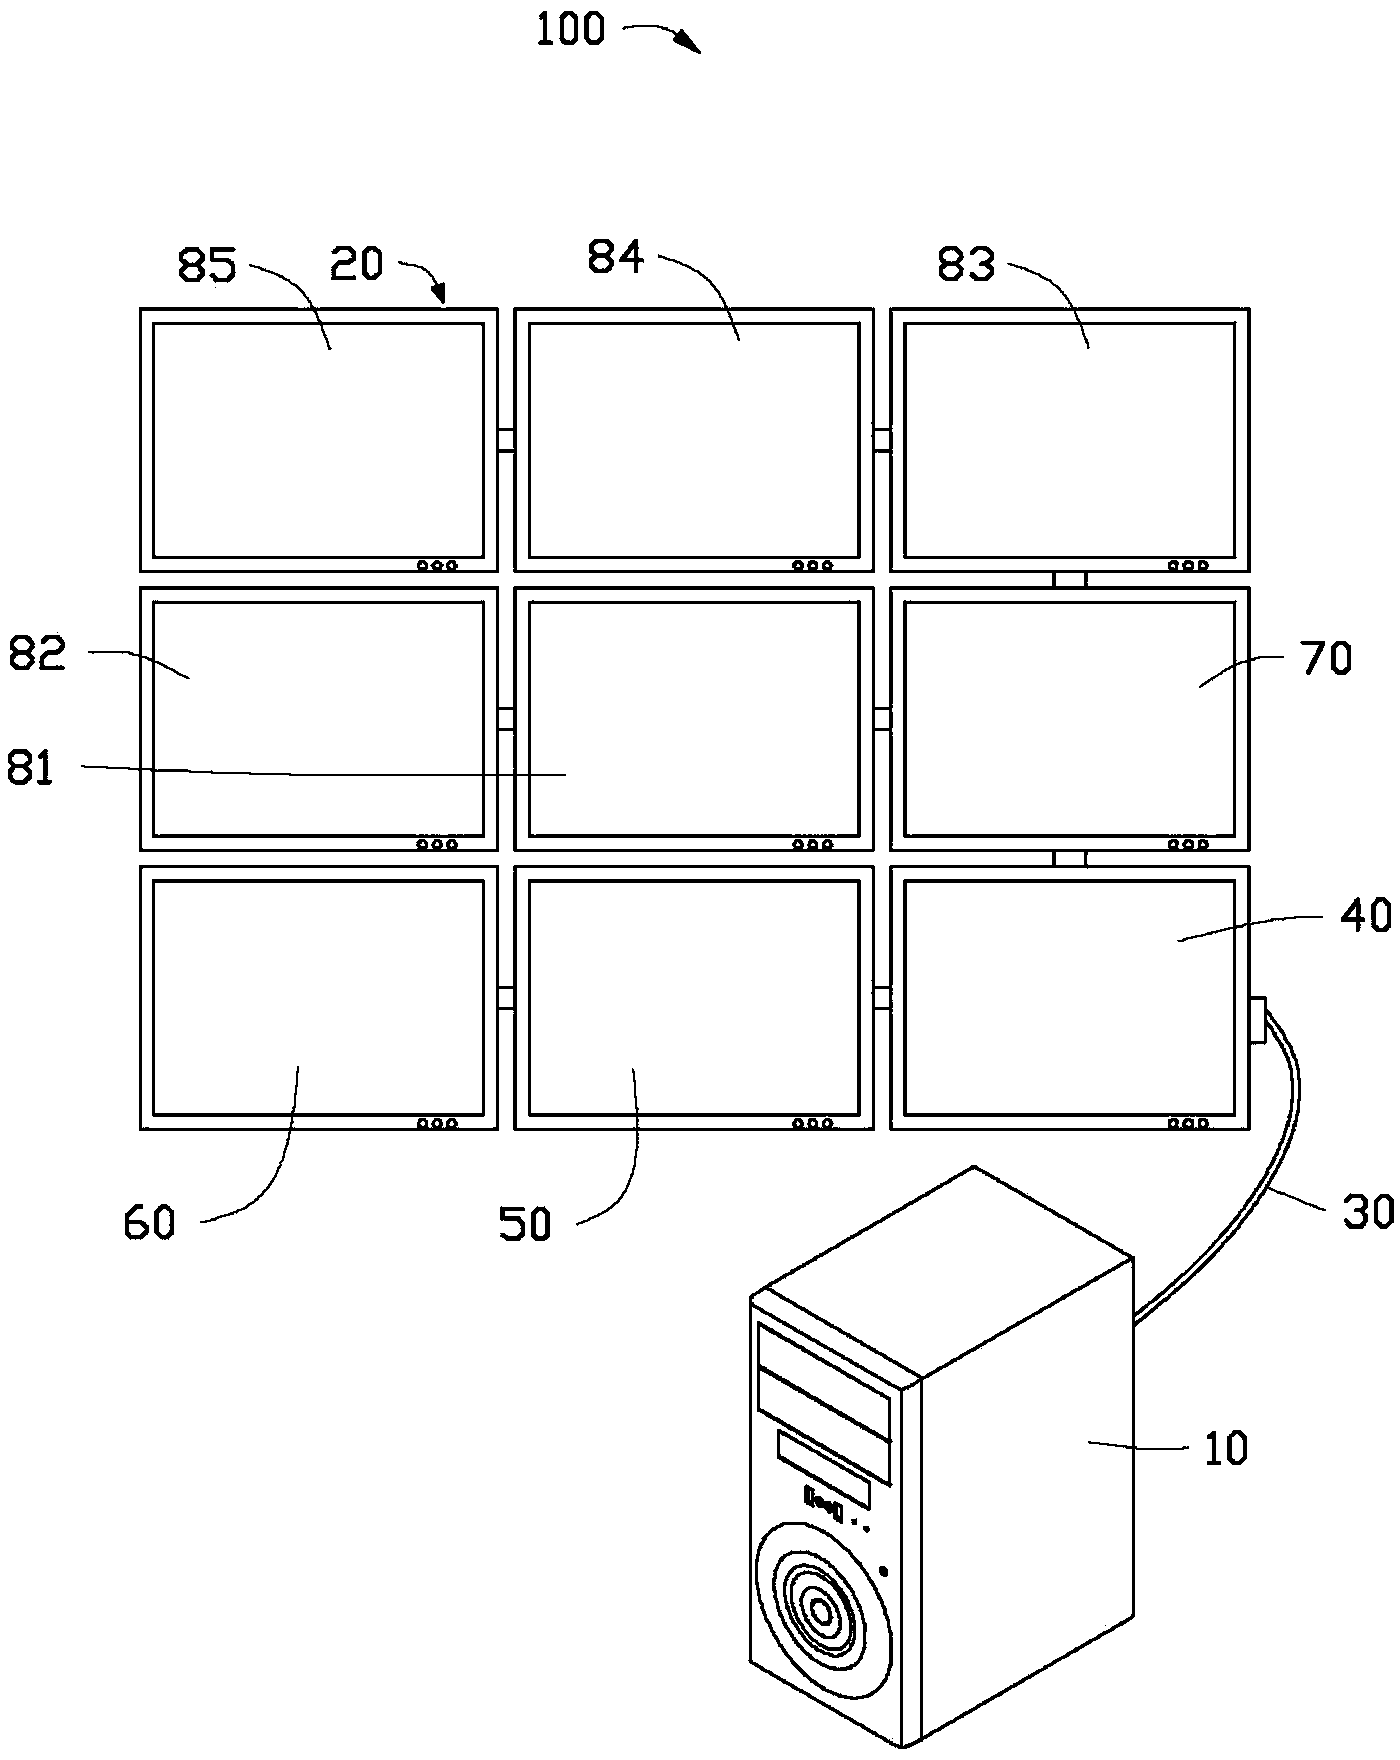 Display device, display system and electronic with display system